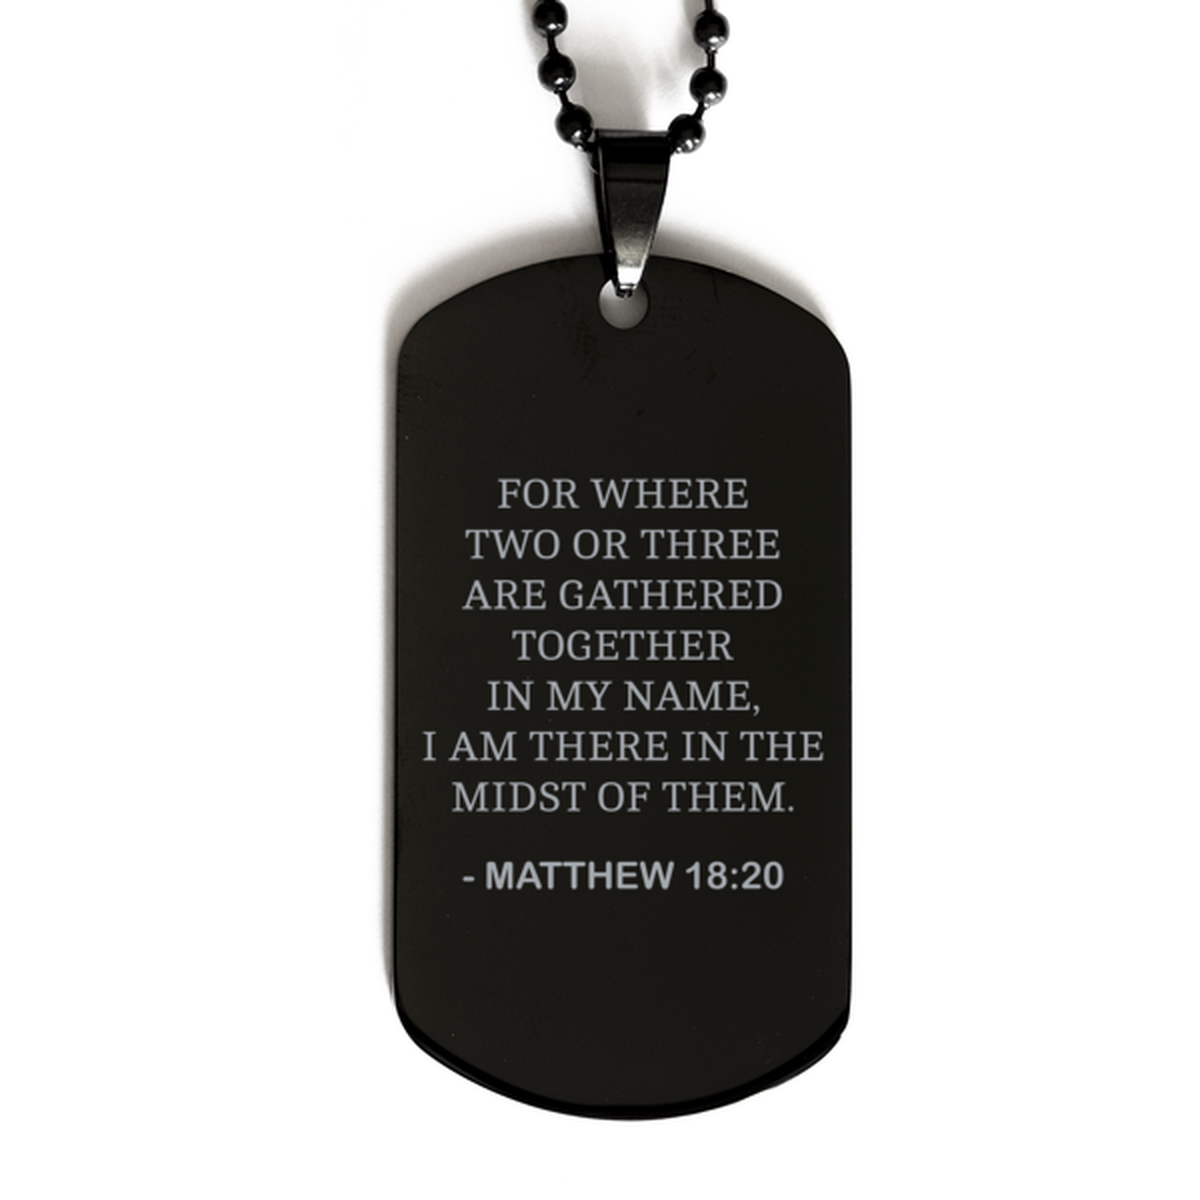 Bible Verse Black Dog Tag, Matthew 18:20 For Where Two Or Three Are Gathered Together, Christian Inspirational Necklace Gifts For Men Women